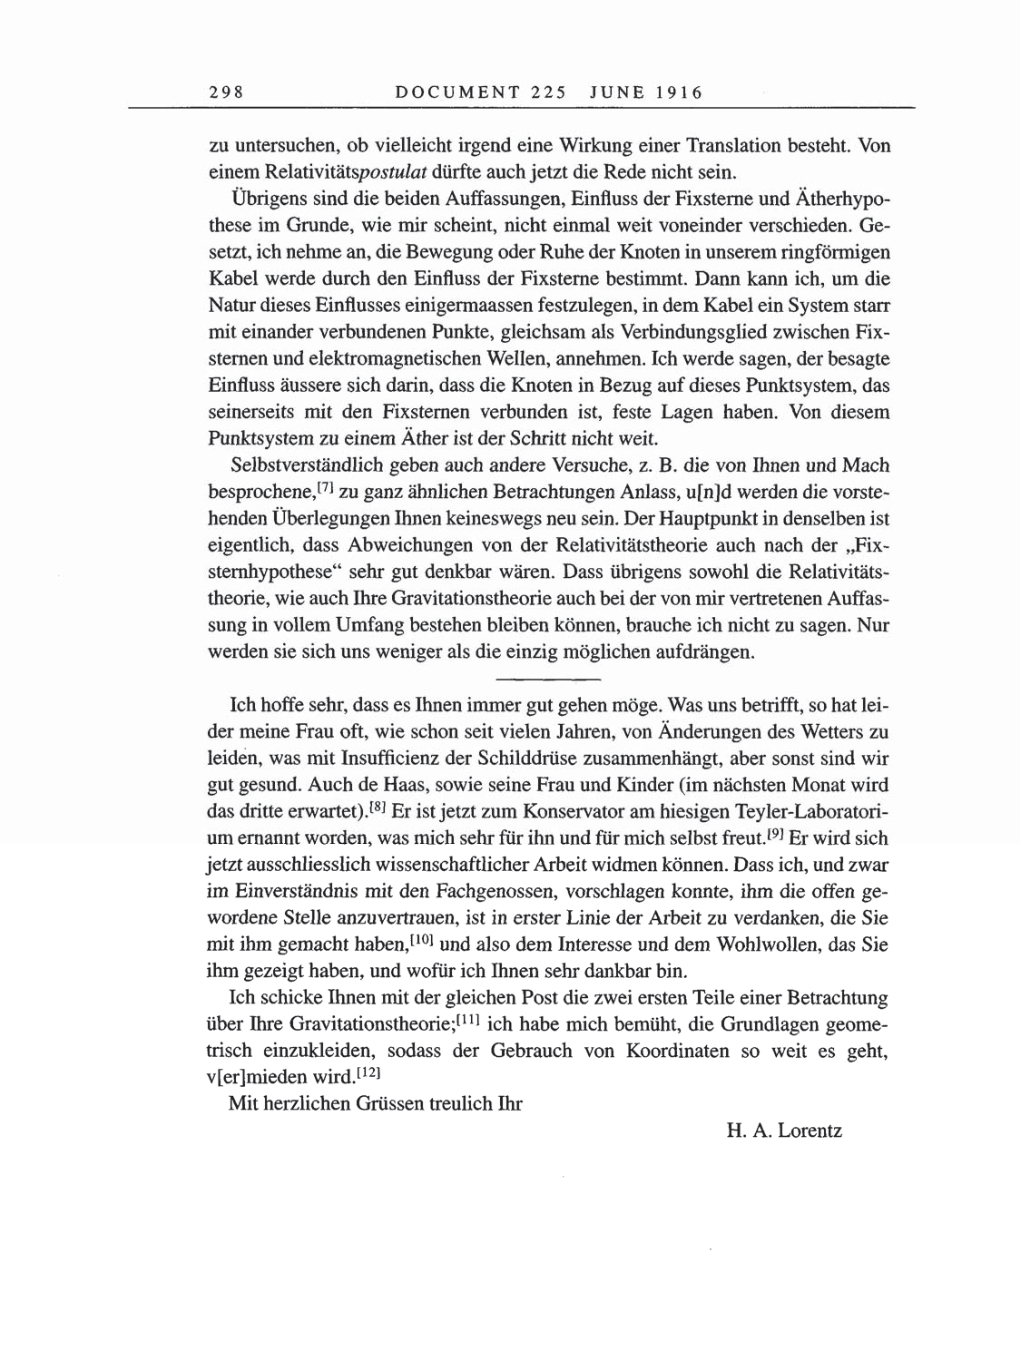 Volume 8, Part A: The Berlin Years: Correspondence 1914-1917 page 298